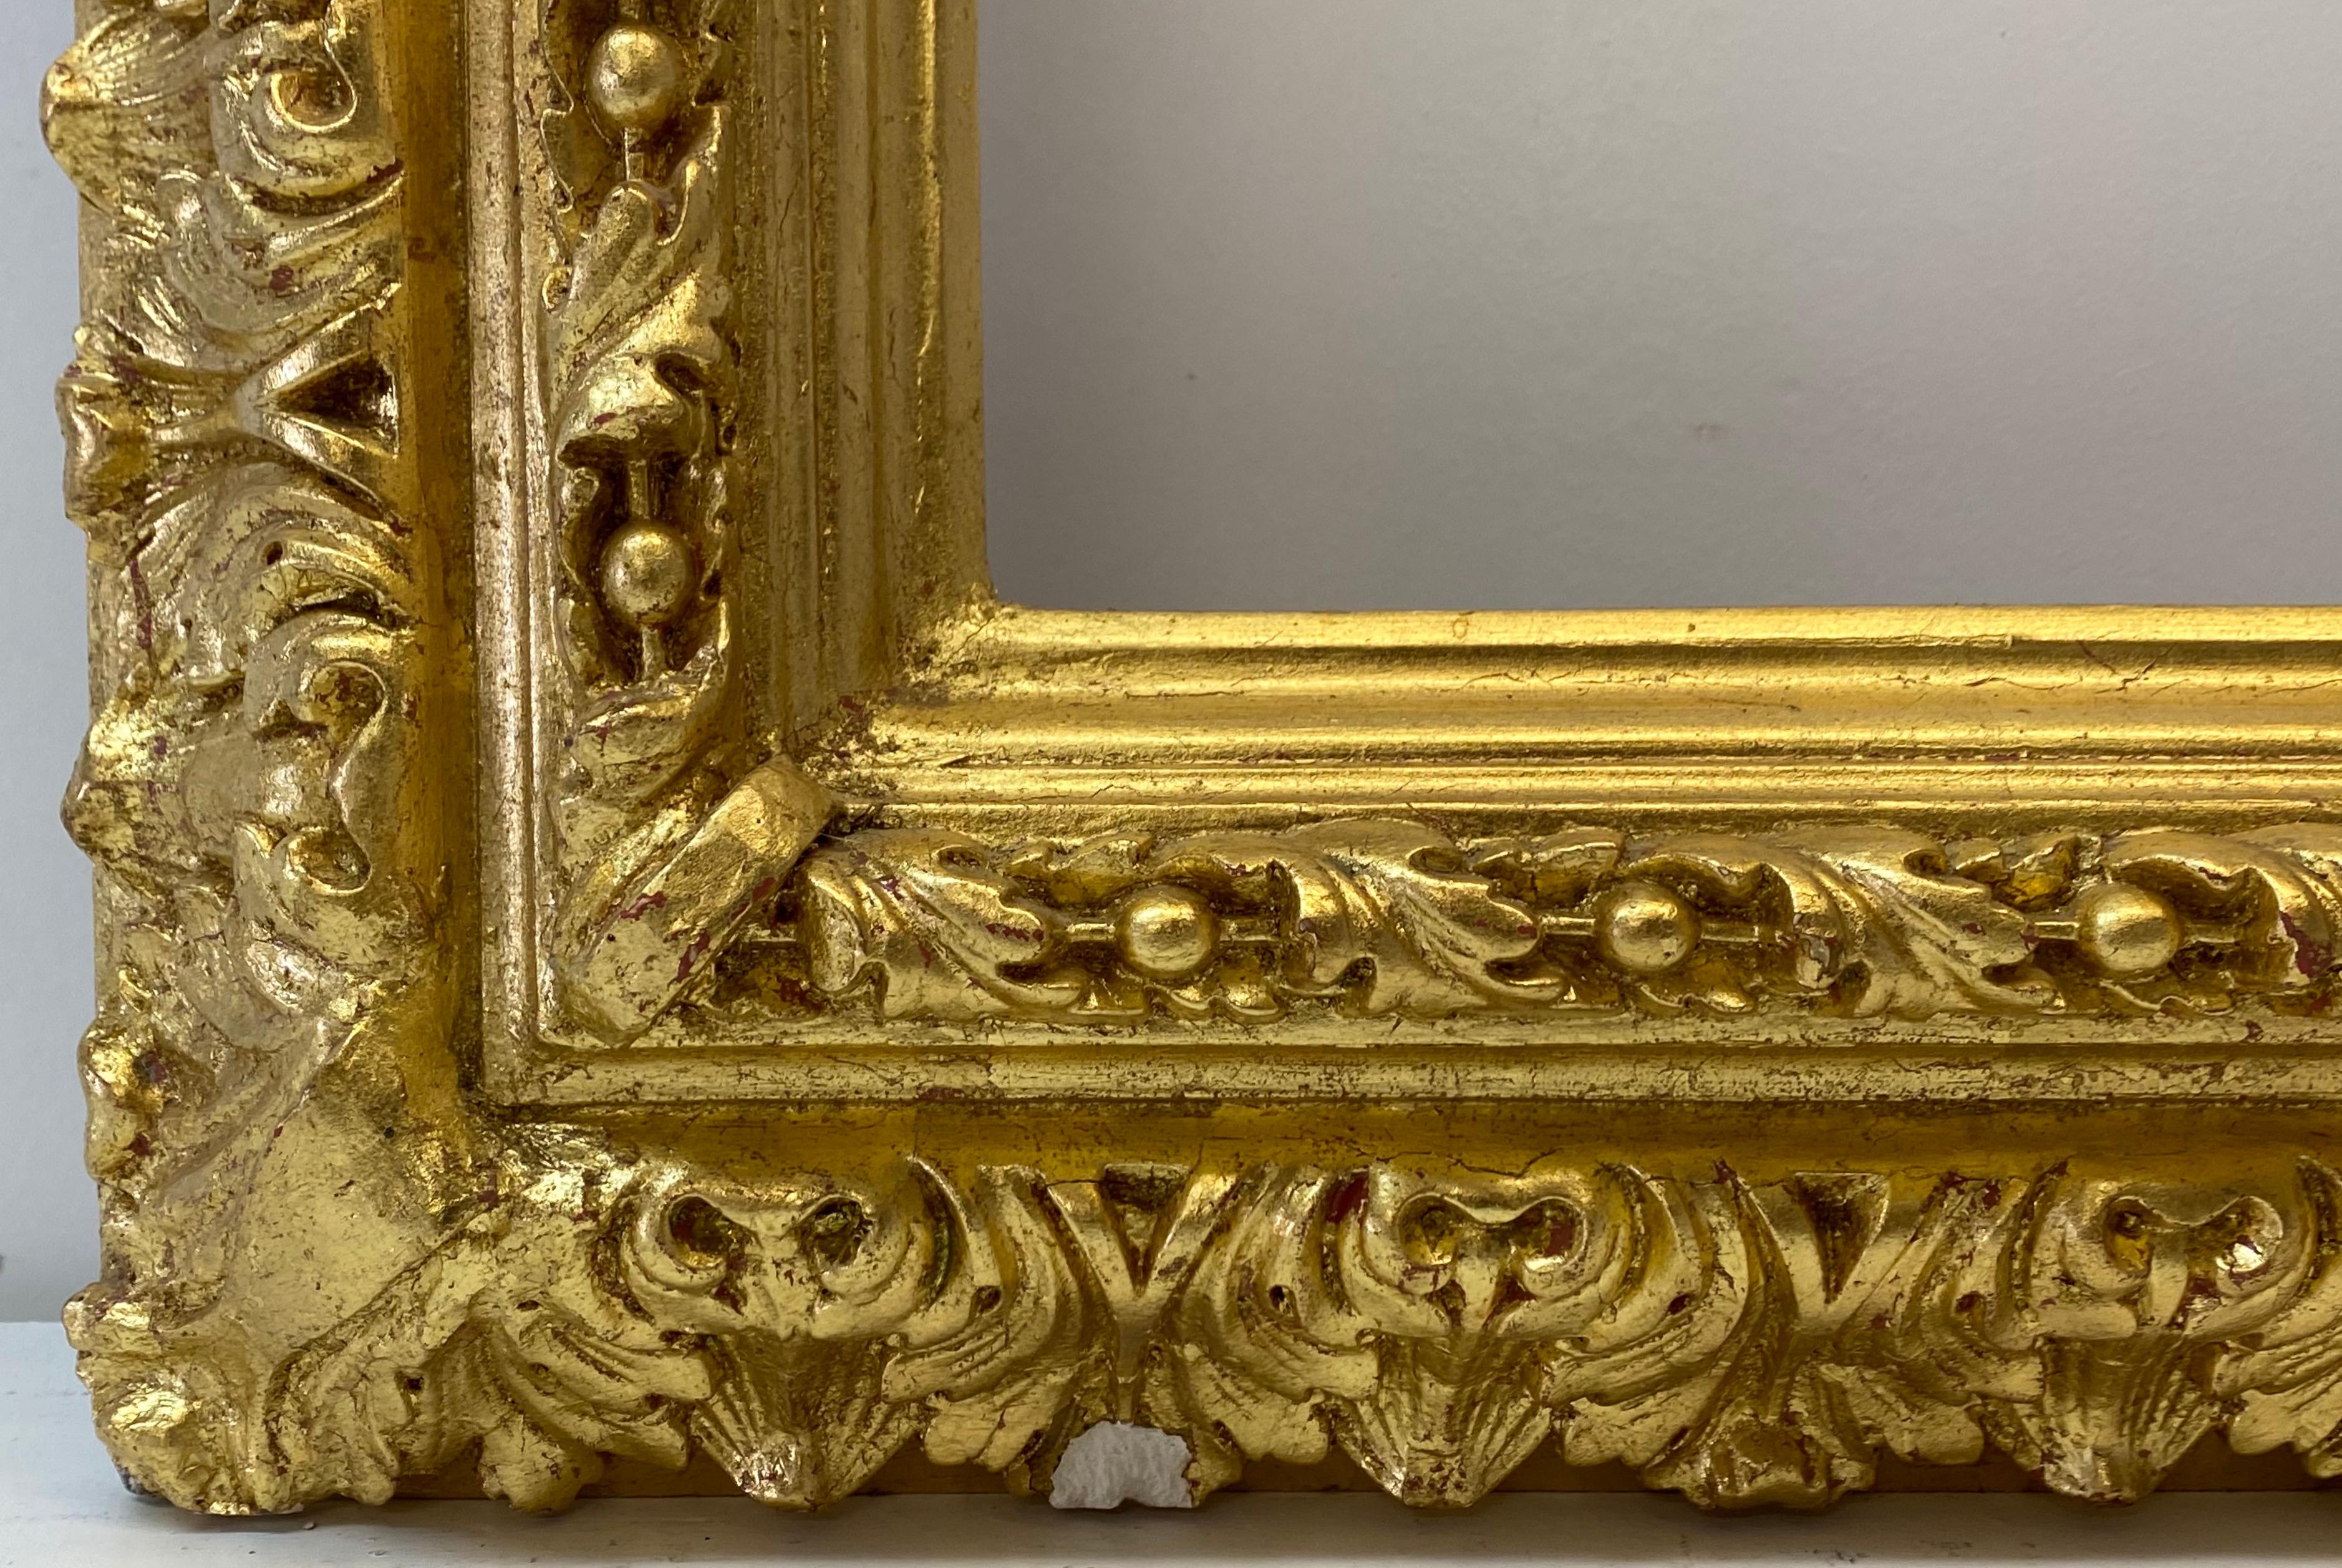 19th century European Gesso, wood & gilded picture frame

Paul Schurr, Berlin, Germany

Handsome 19th century picture frame

The frame is gesso & wood with ample remains of the original gold gilding

Interior dimensions 20